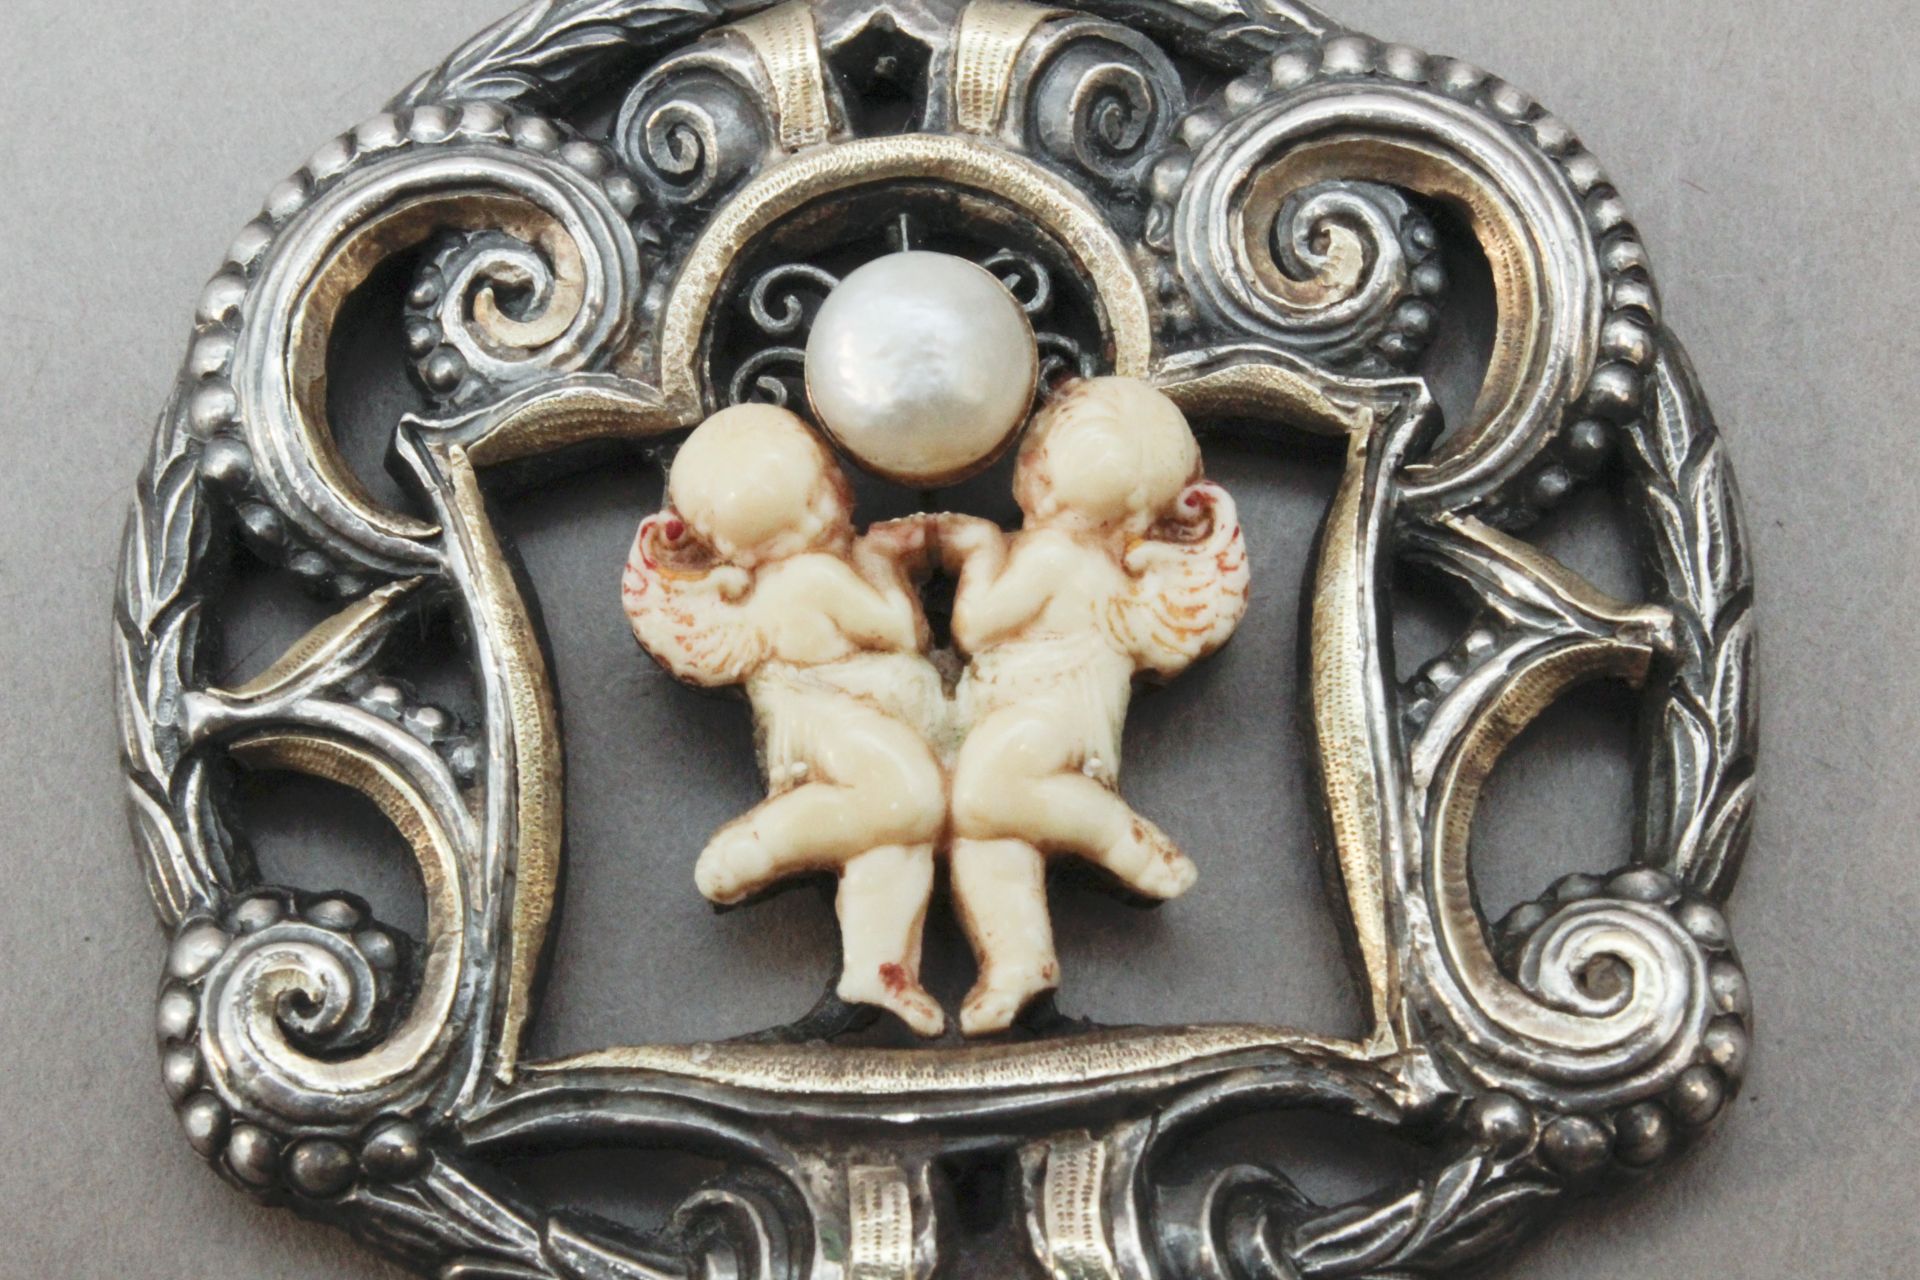 Ramon Sunyer Clarà. A silver and gold pendant - Image 2 of 3